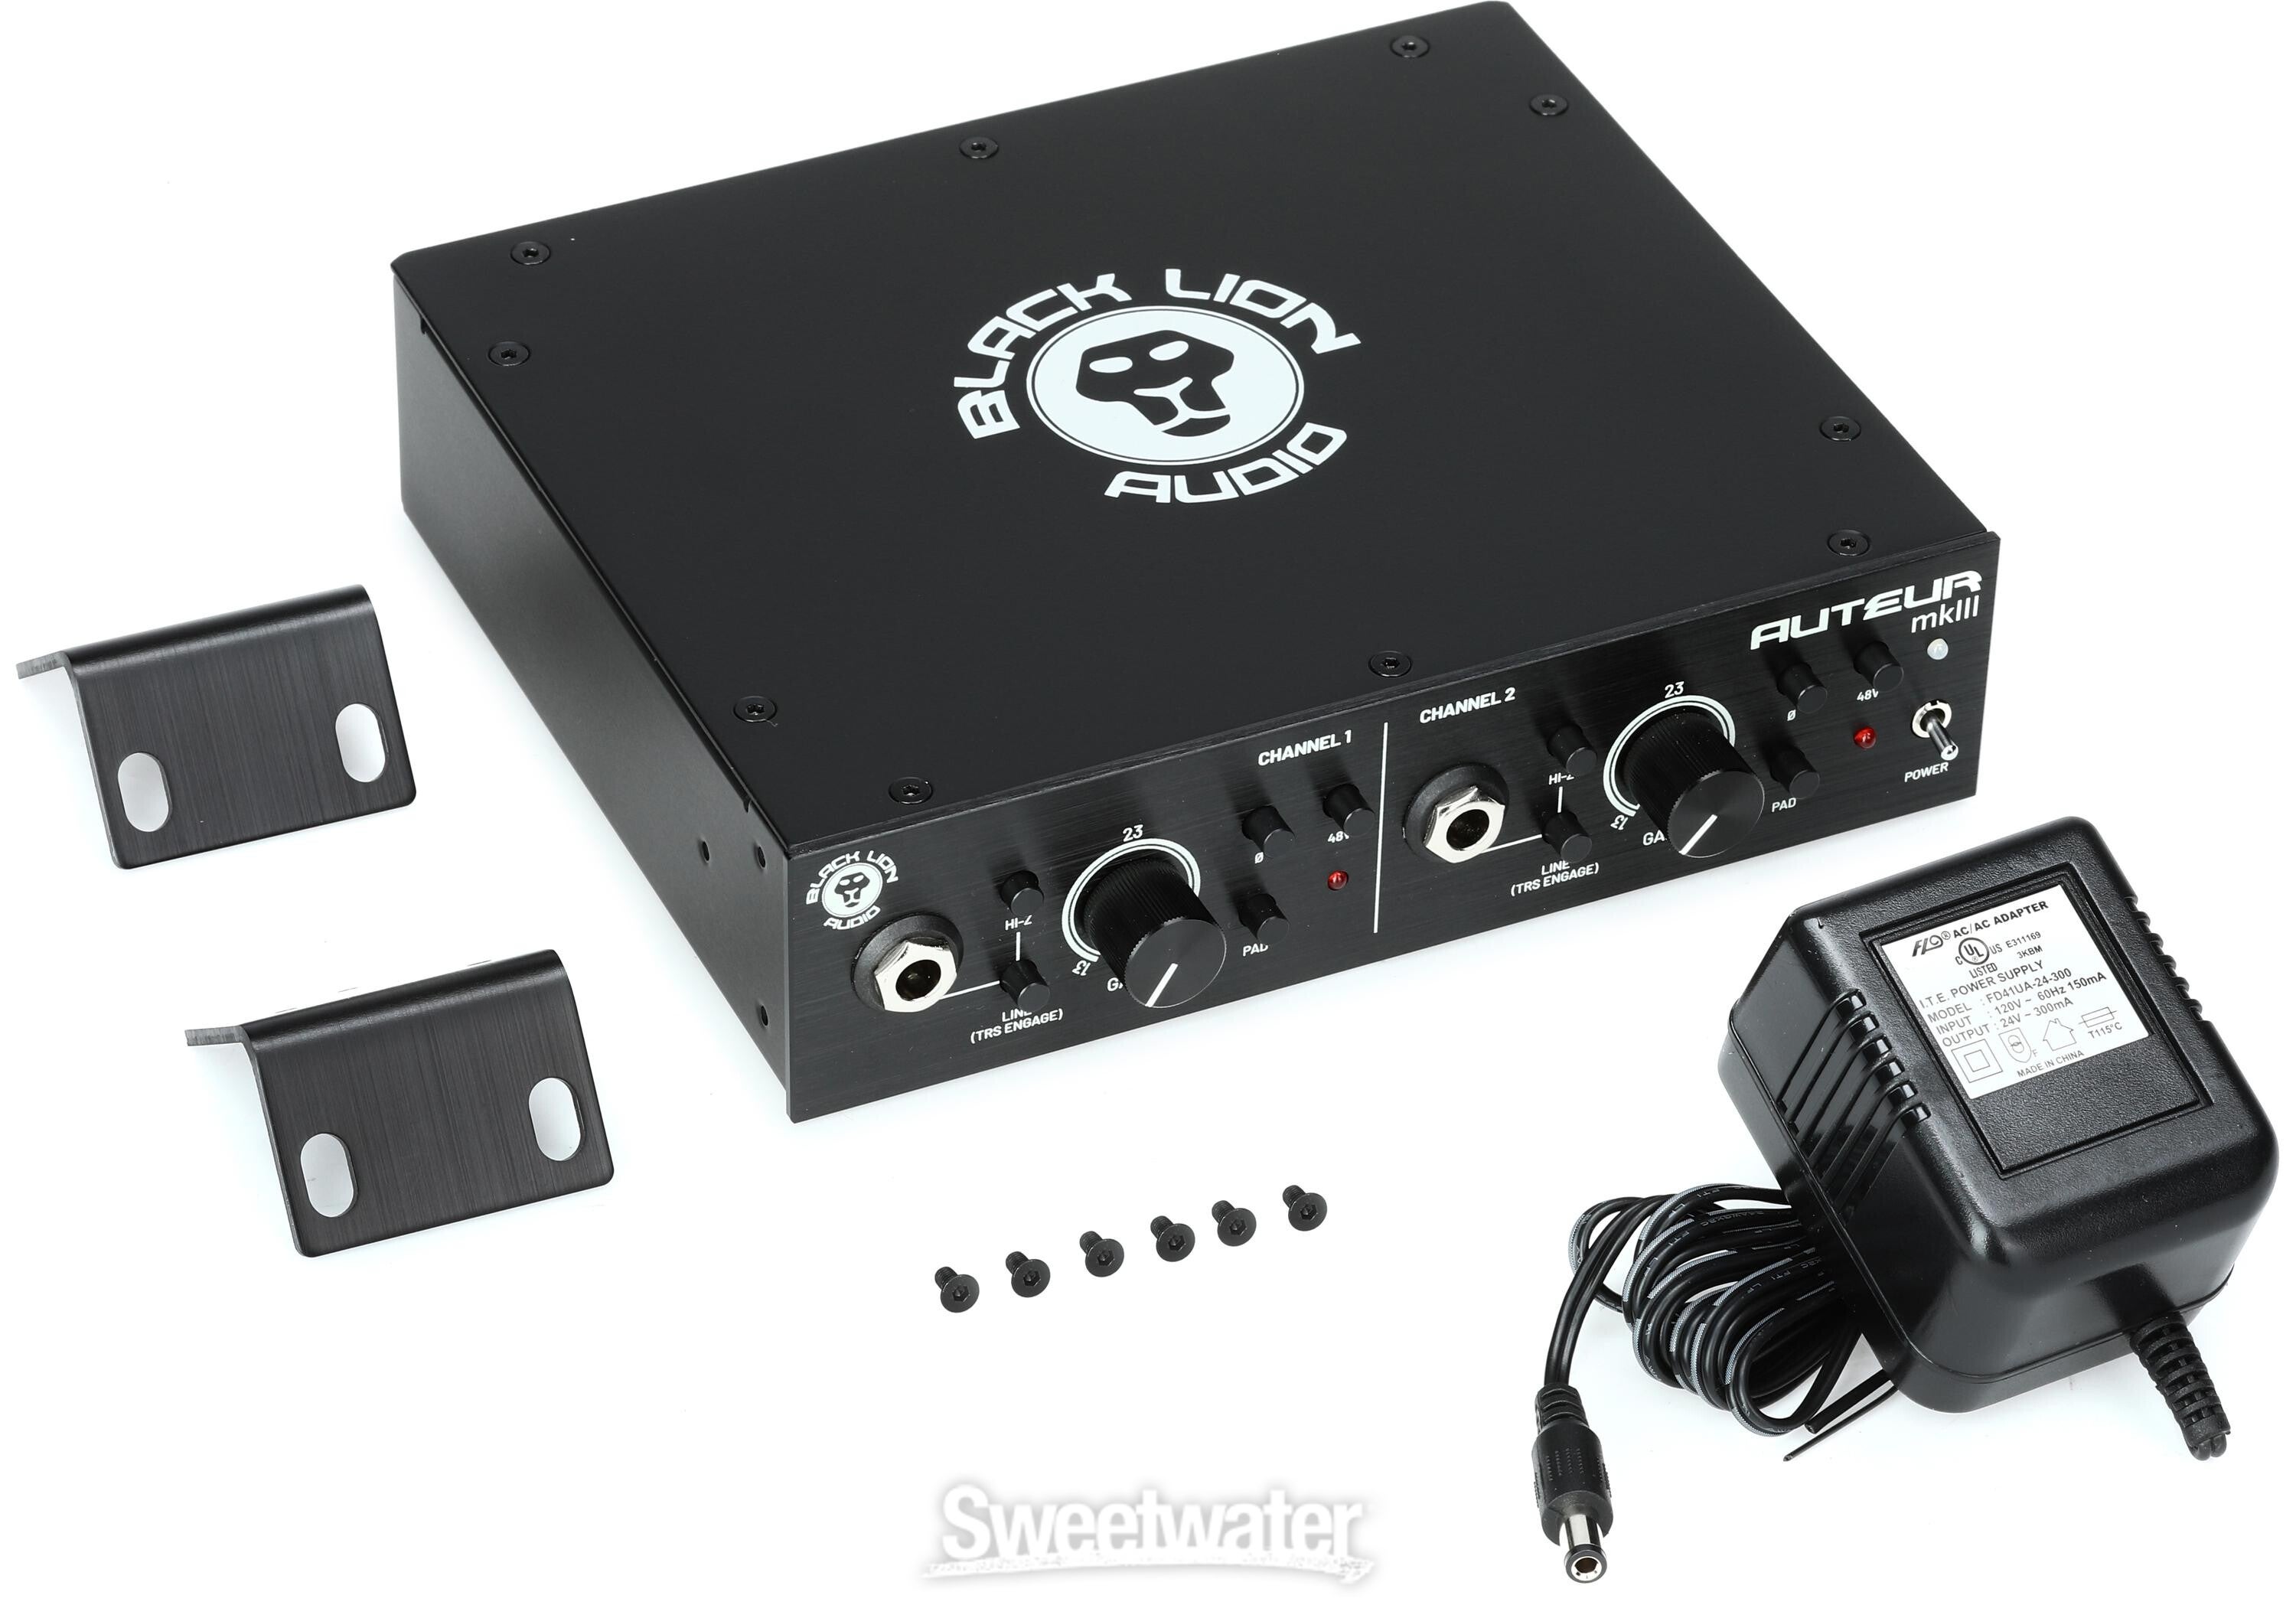 Black Lion Audio Auteur MkIII 2-channel Microphone Preamp | Sweetwater